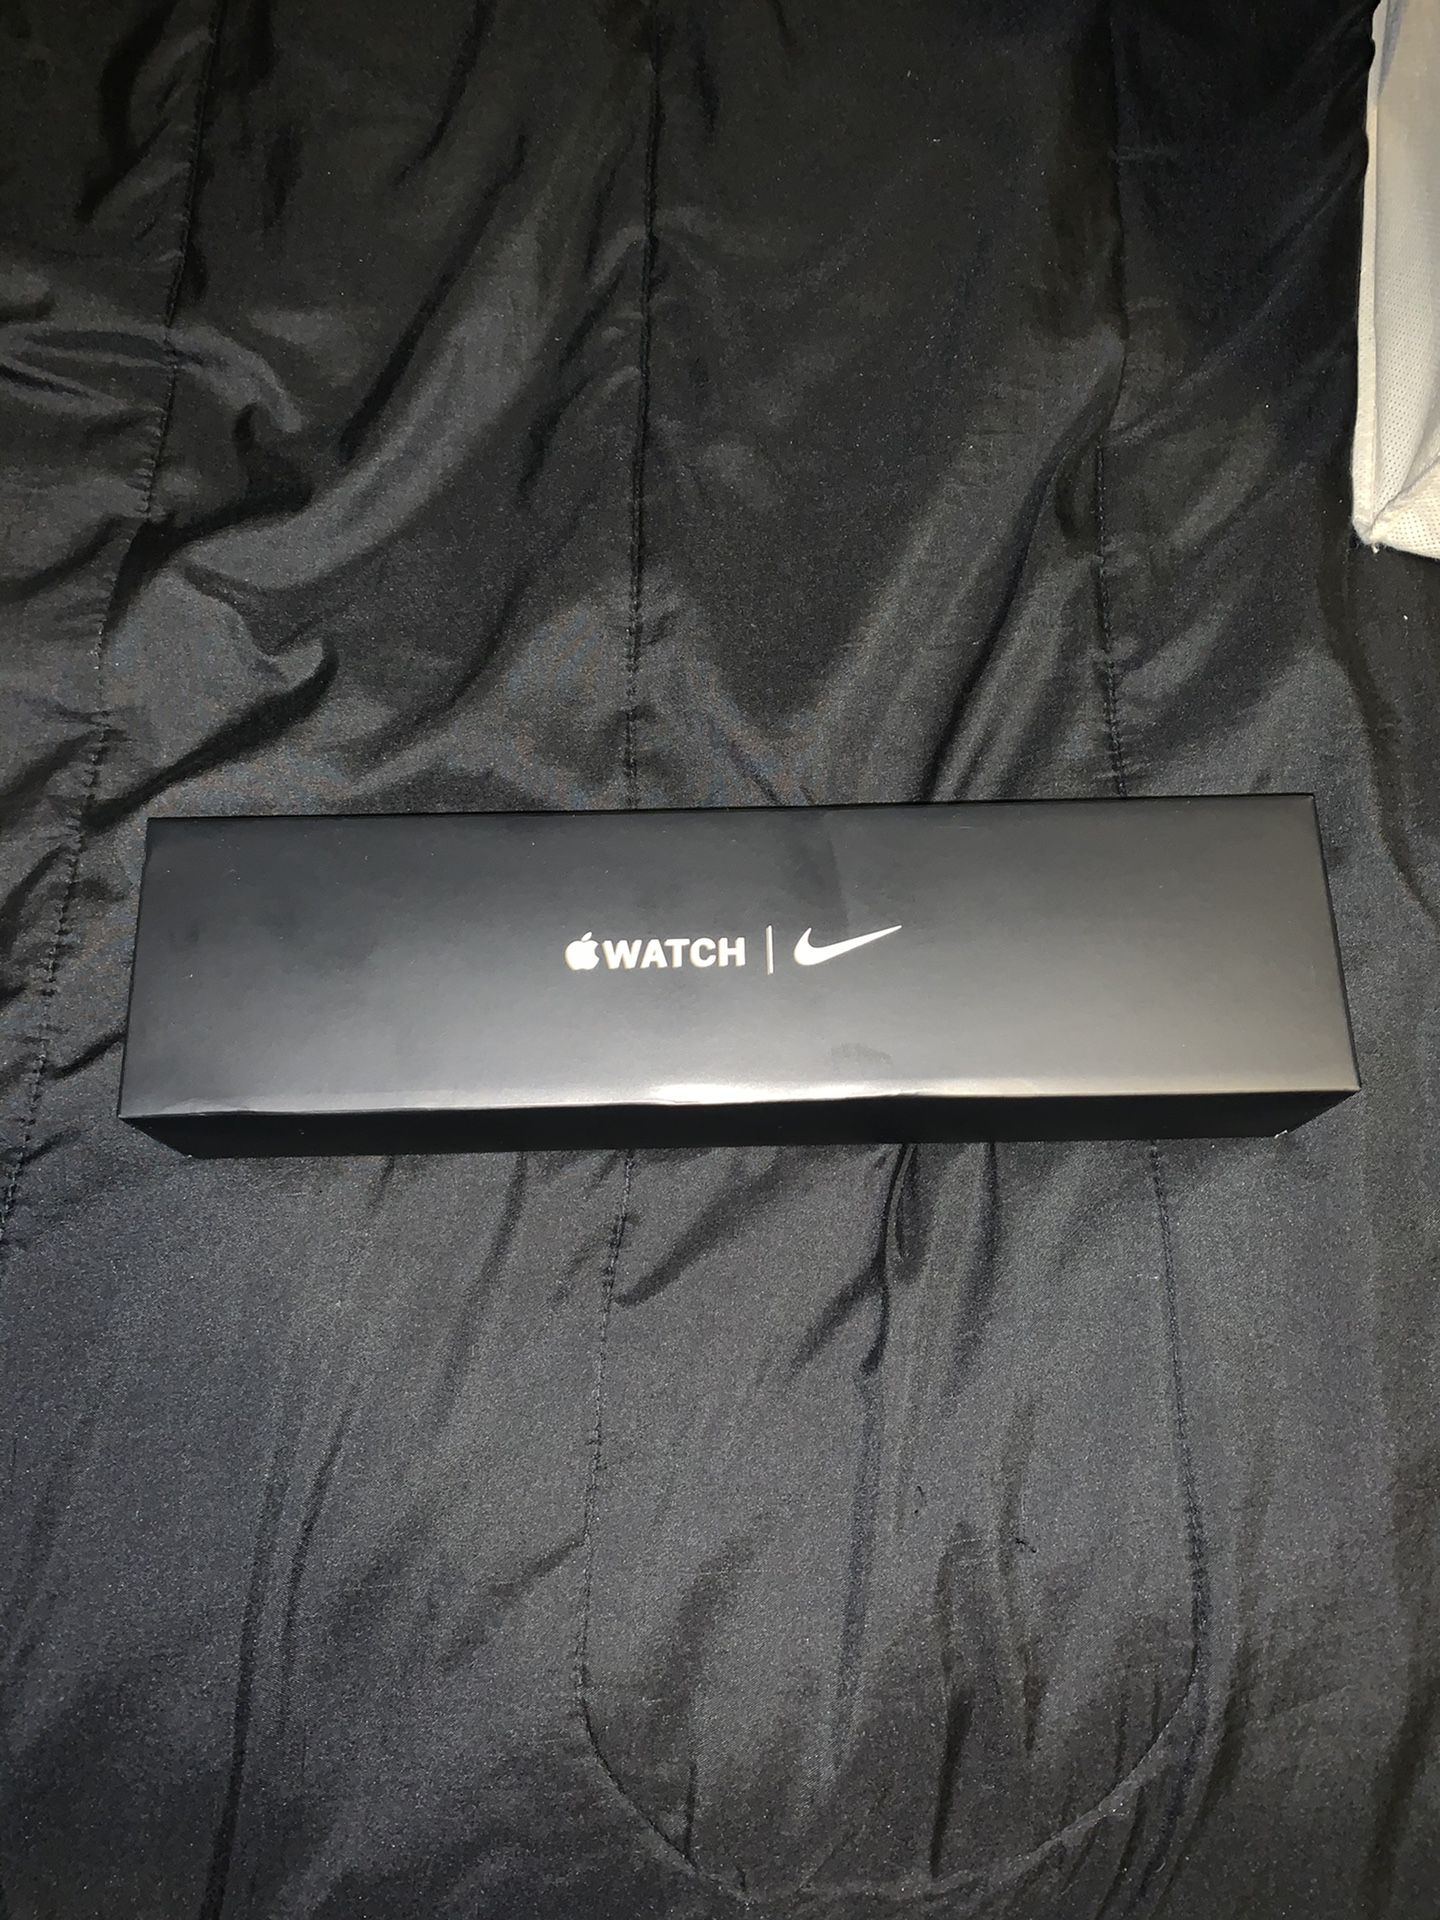 Apple Nike Watch Series 5 Cellular Edition